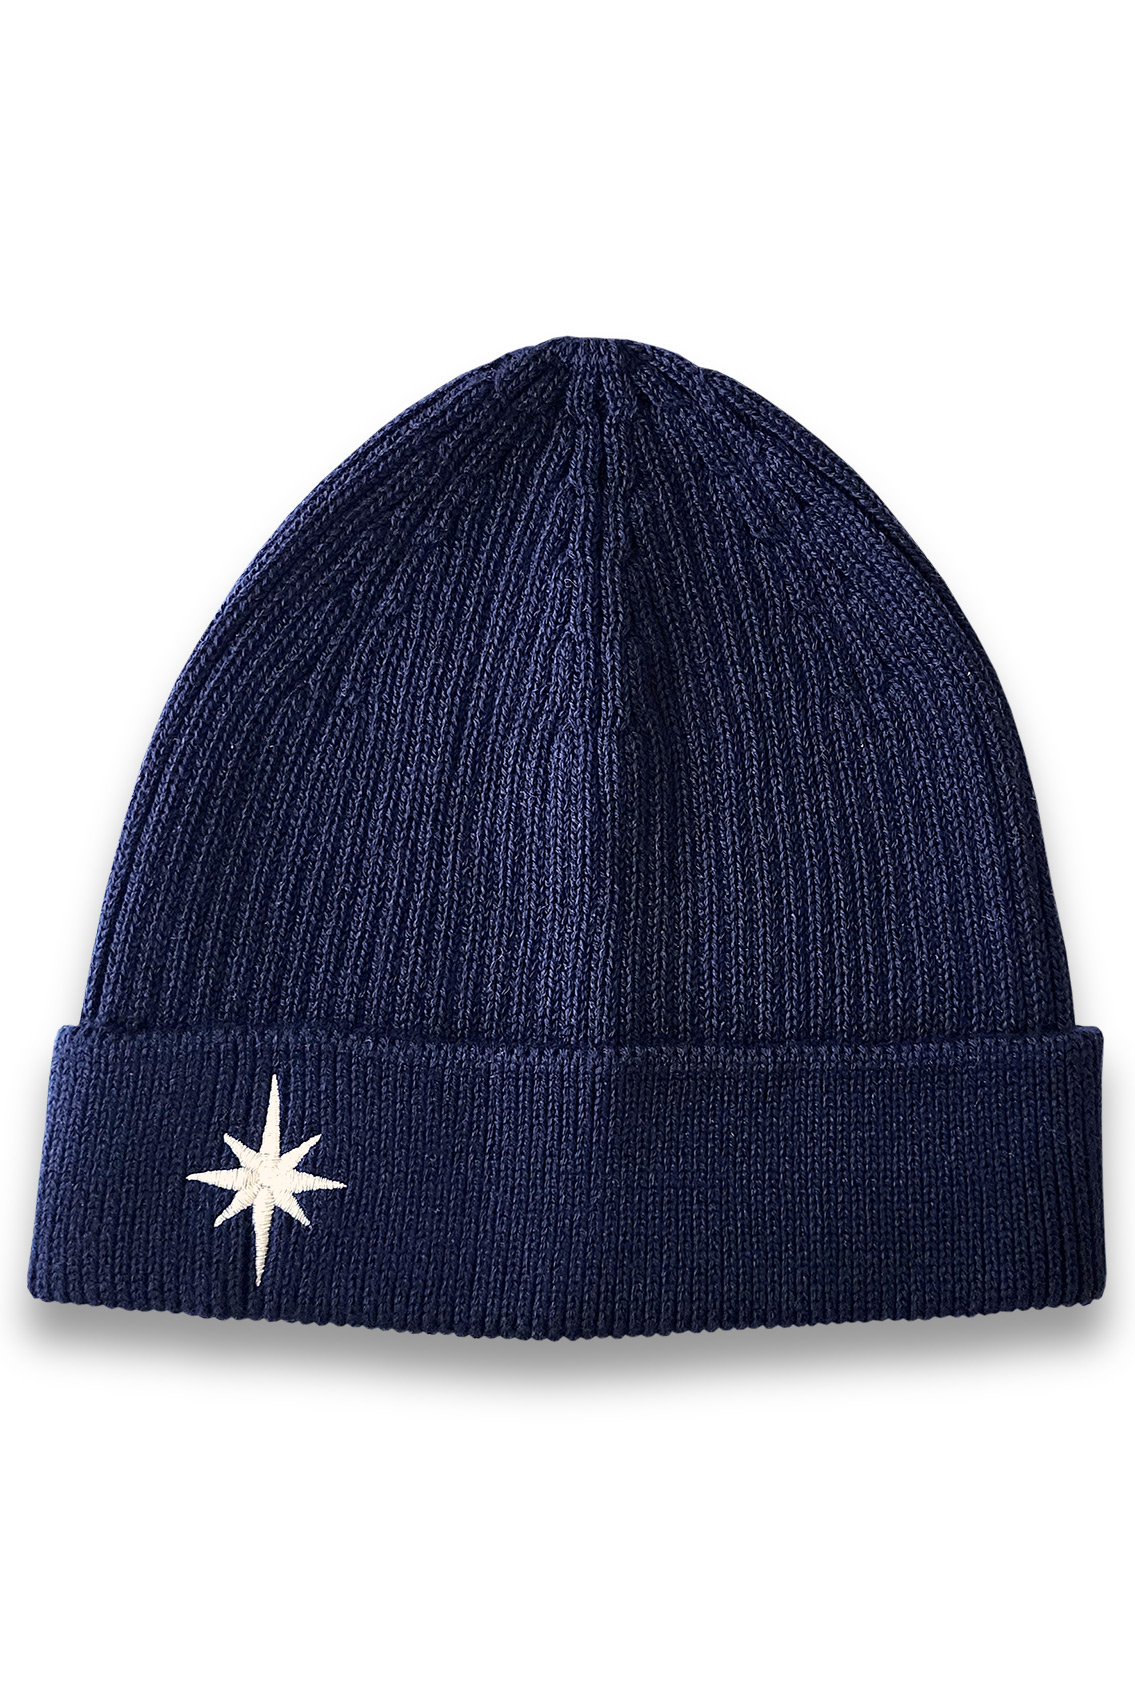 hat with christmas star